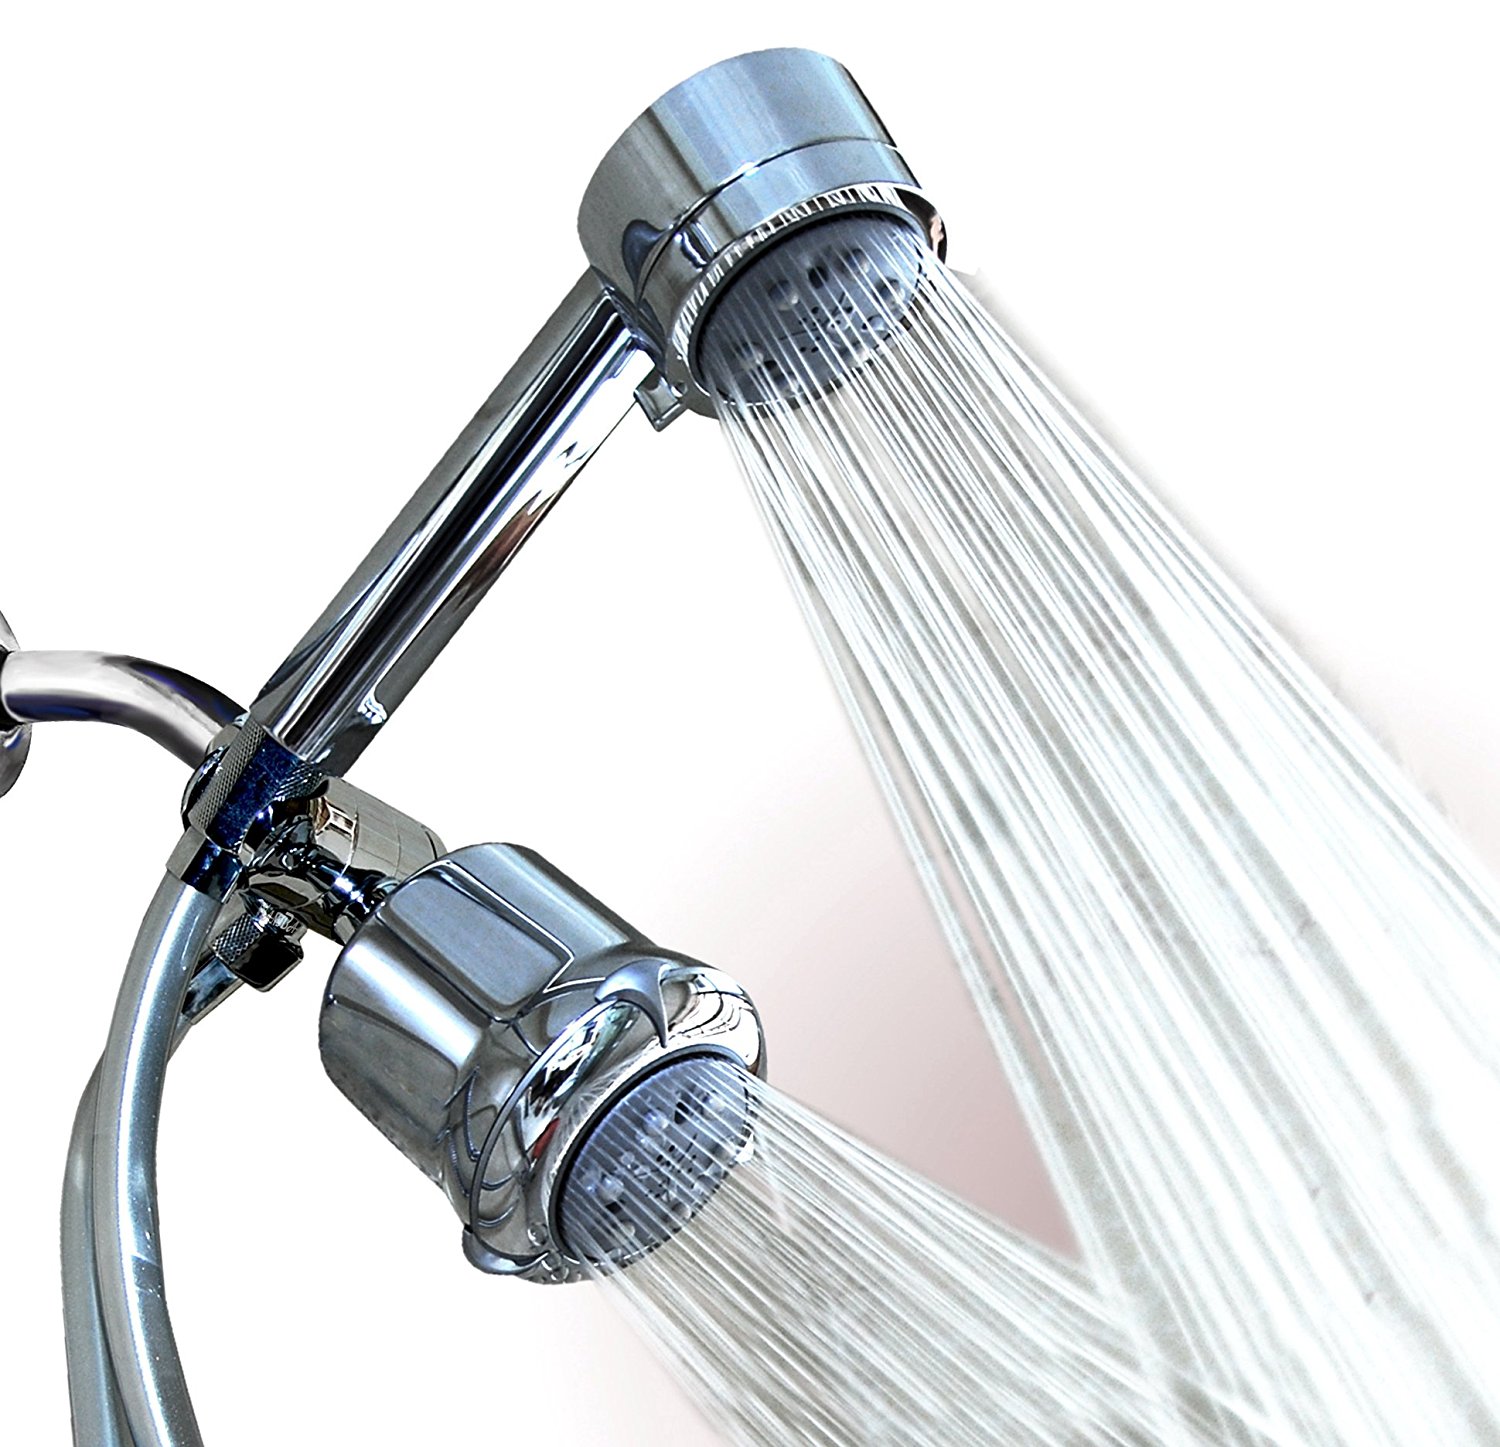 10 Best Dual Shower Heads - (Reviews & Guide 2021)